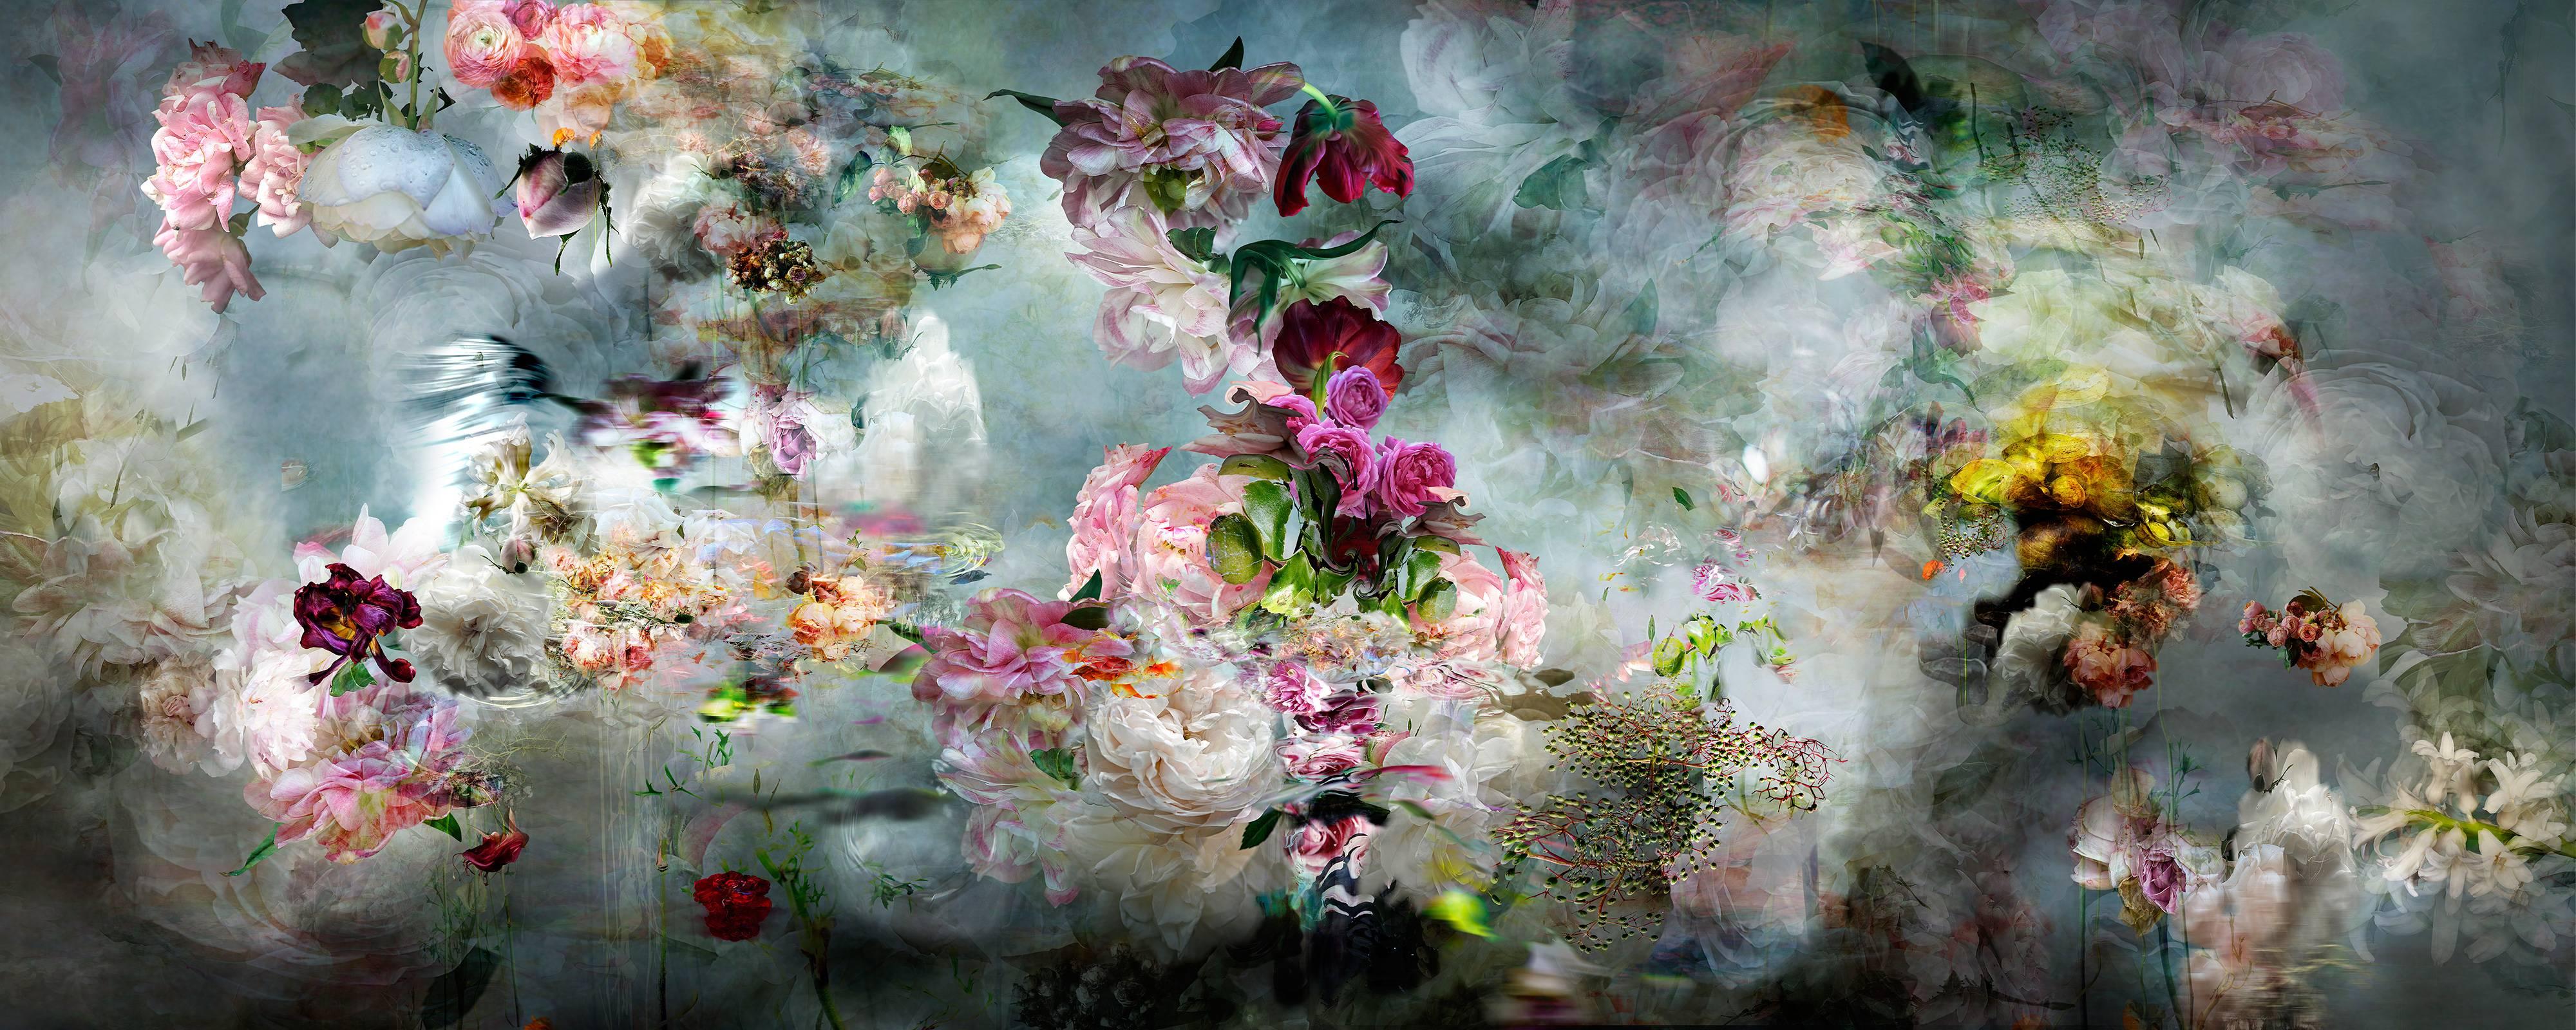 Abstract Photograph Isabelle Menin - Song for dead heroes n°4, photo abstraite de paysage, nature morte florale